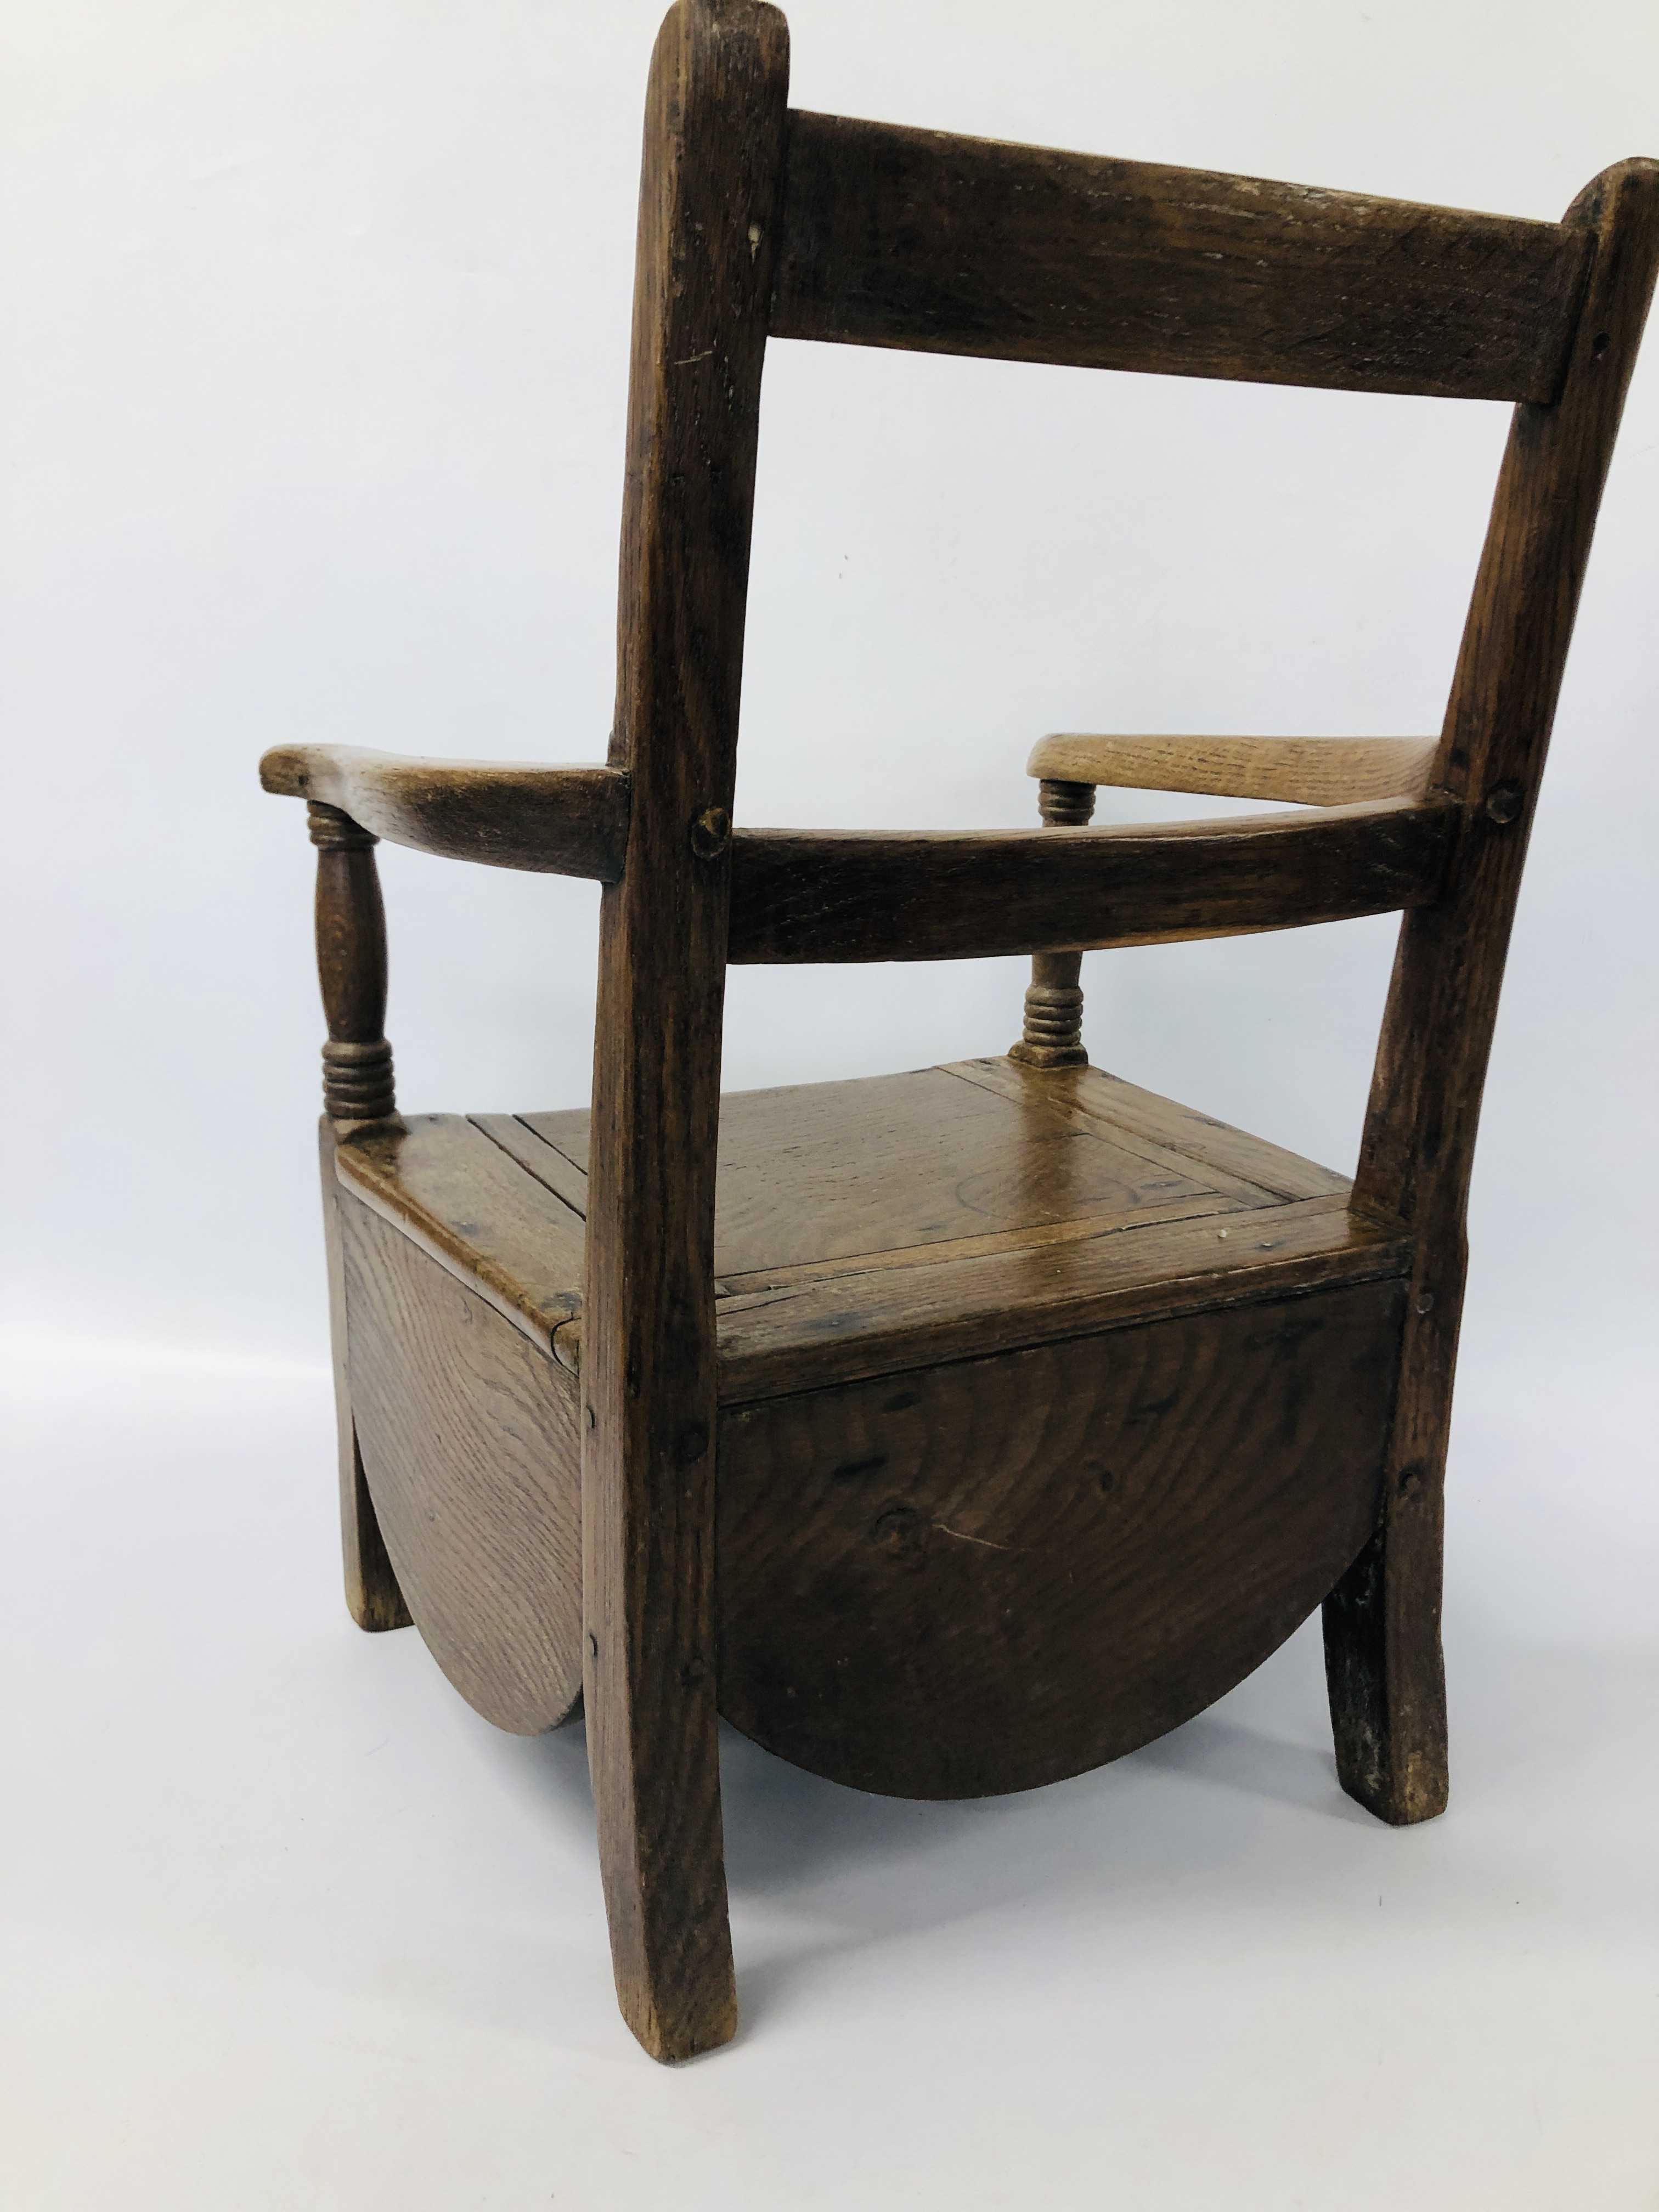 A CHILDS OAK GEORGIAN COMMODE CHAIR - Image 7 of 7